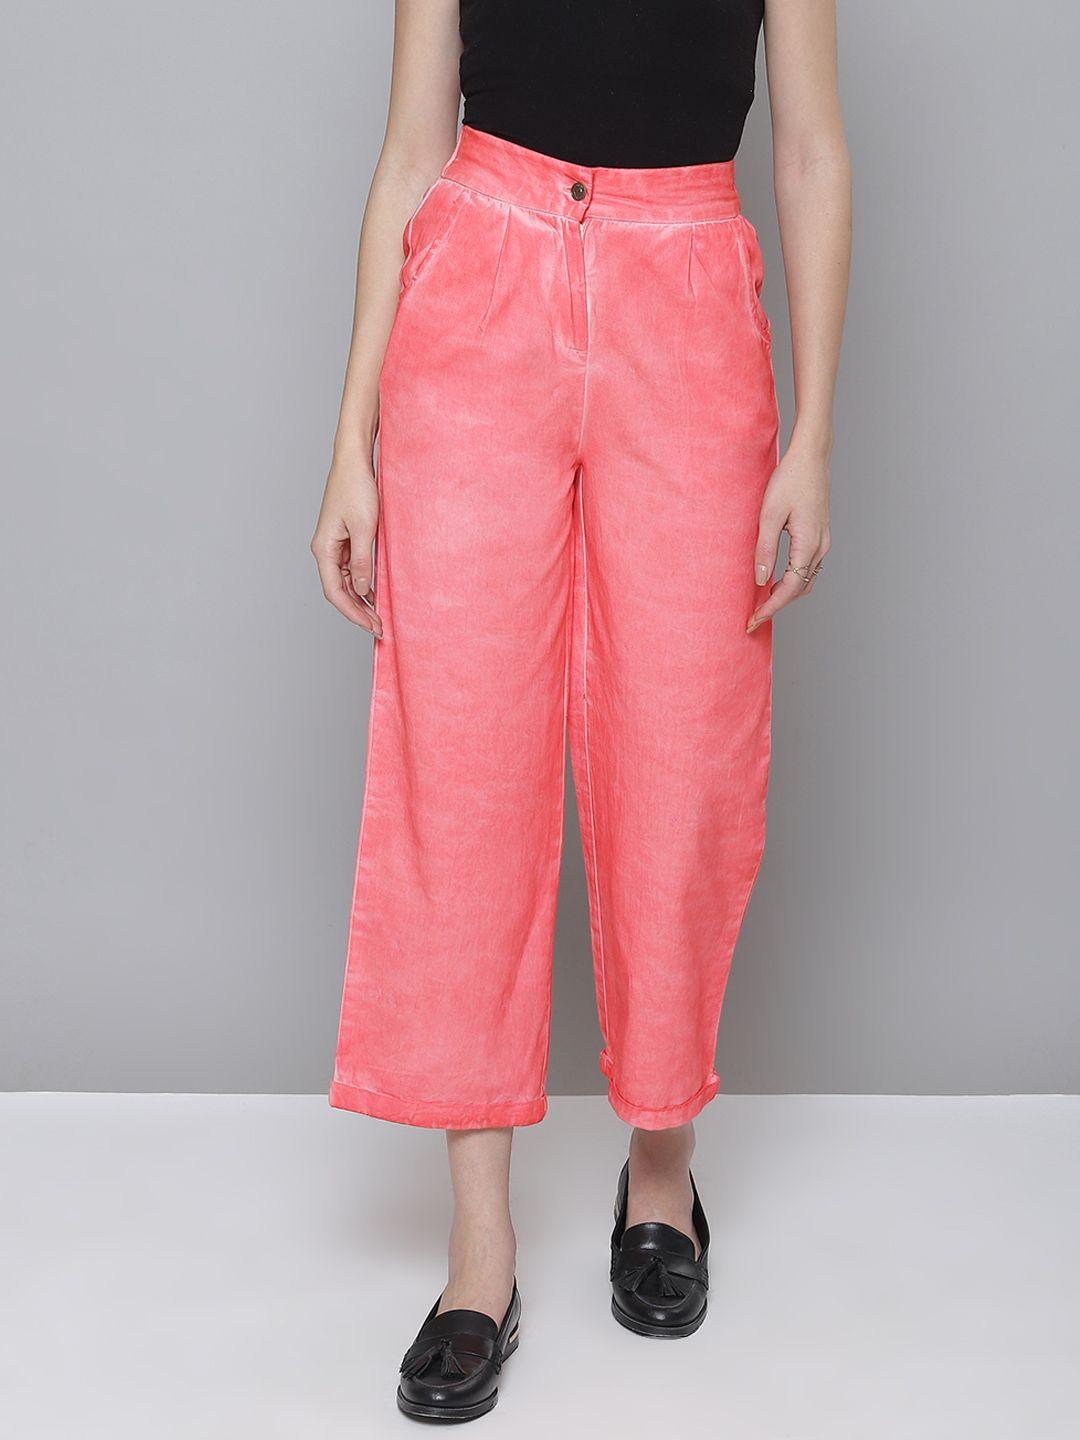 sassafras women pink cotton twill faded culottes trousers